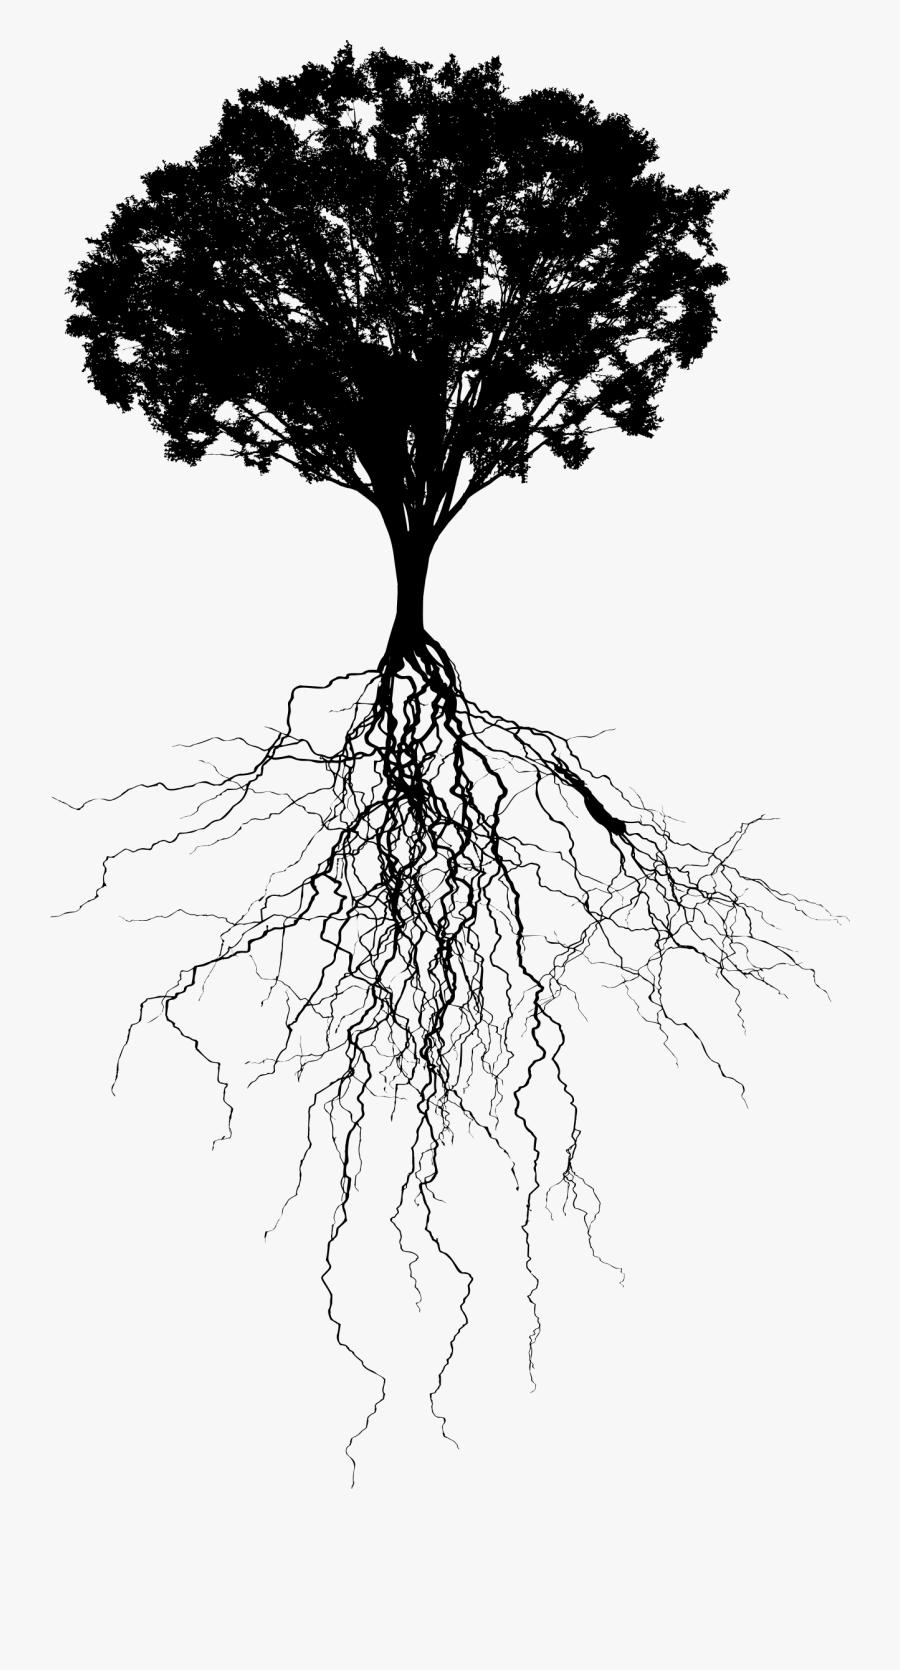 Tree With Deep Roots Silhouette - Tree Roots Silhouette Png, Transparent Clipart